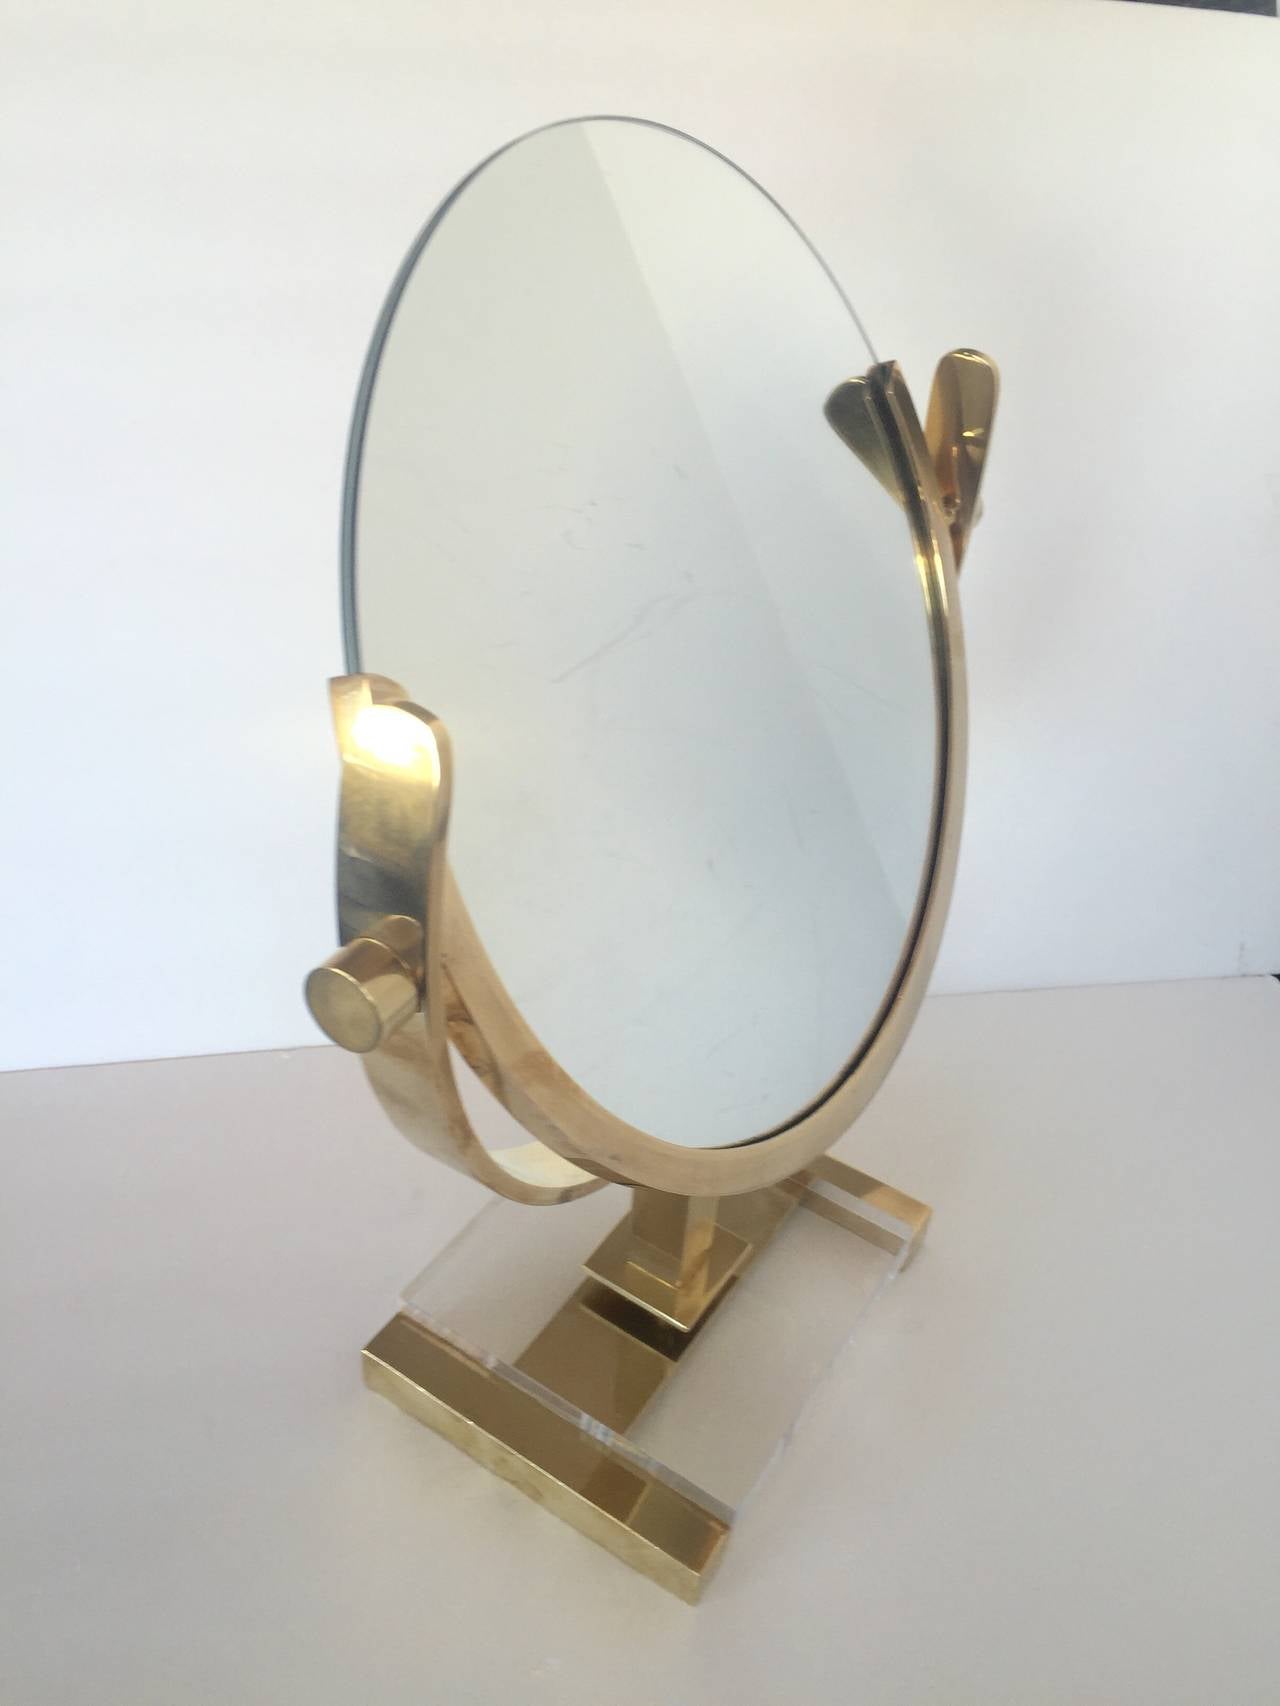 Stunning pivoting table mirror in brass and Lucite. Well made with great detail. Recently polished.